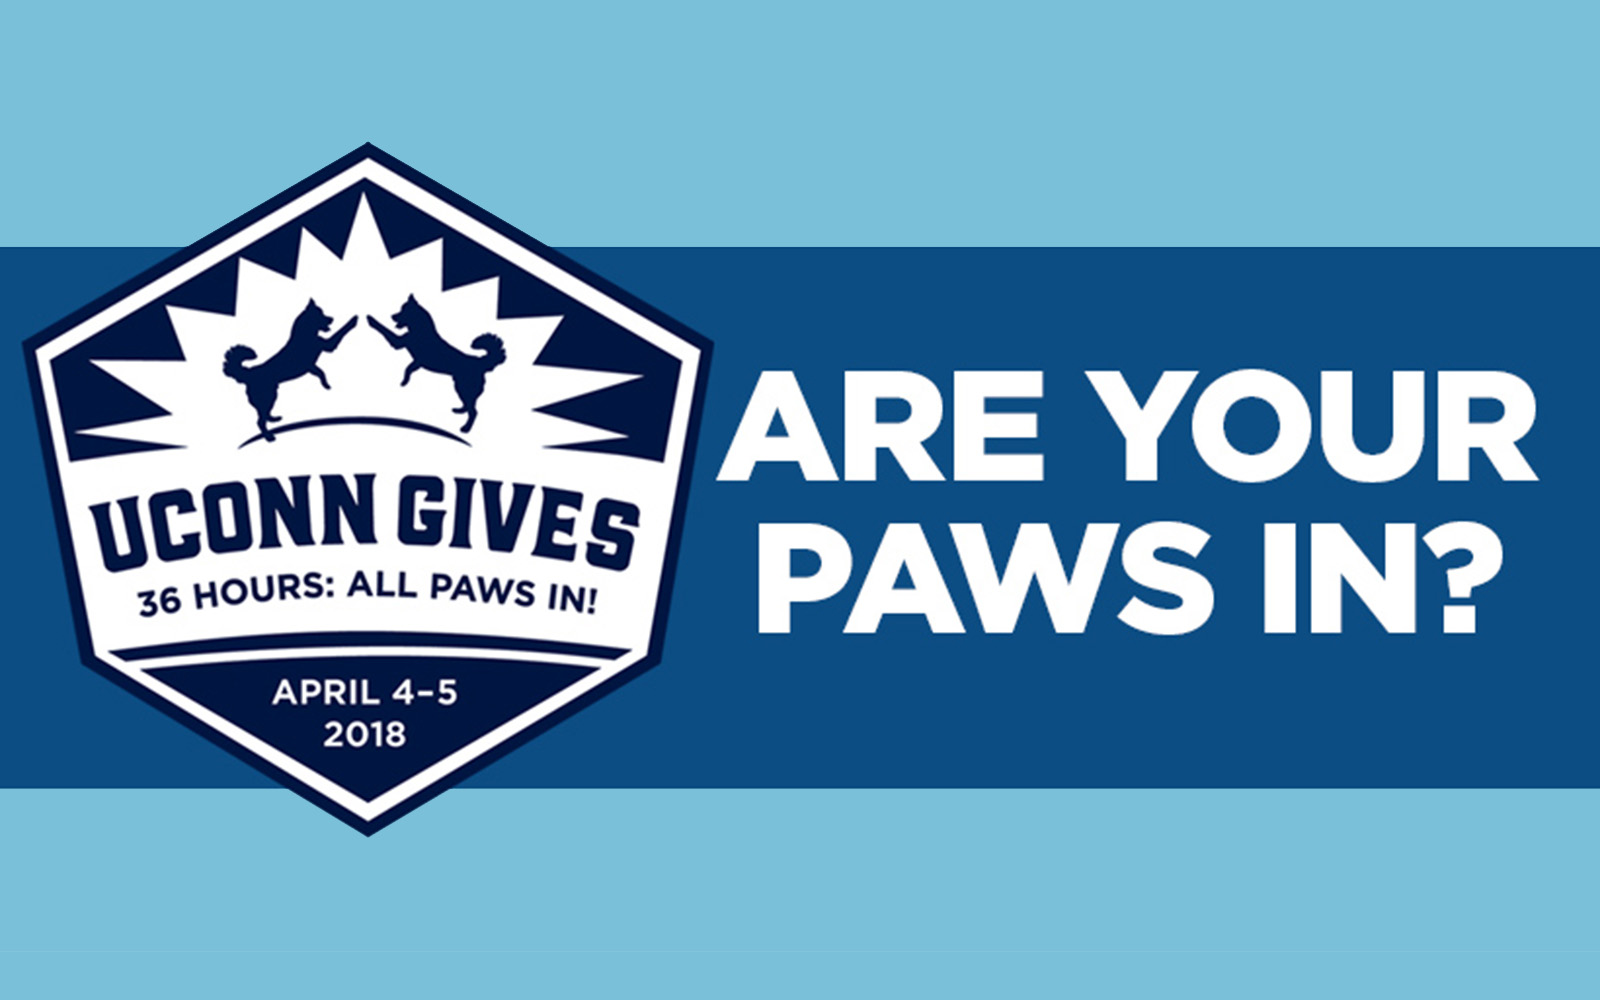 UConn Gives: 36 Hours. All Paws In.